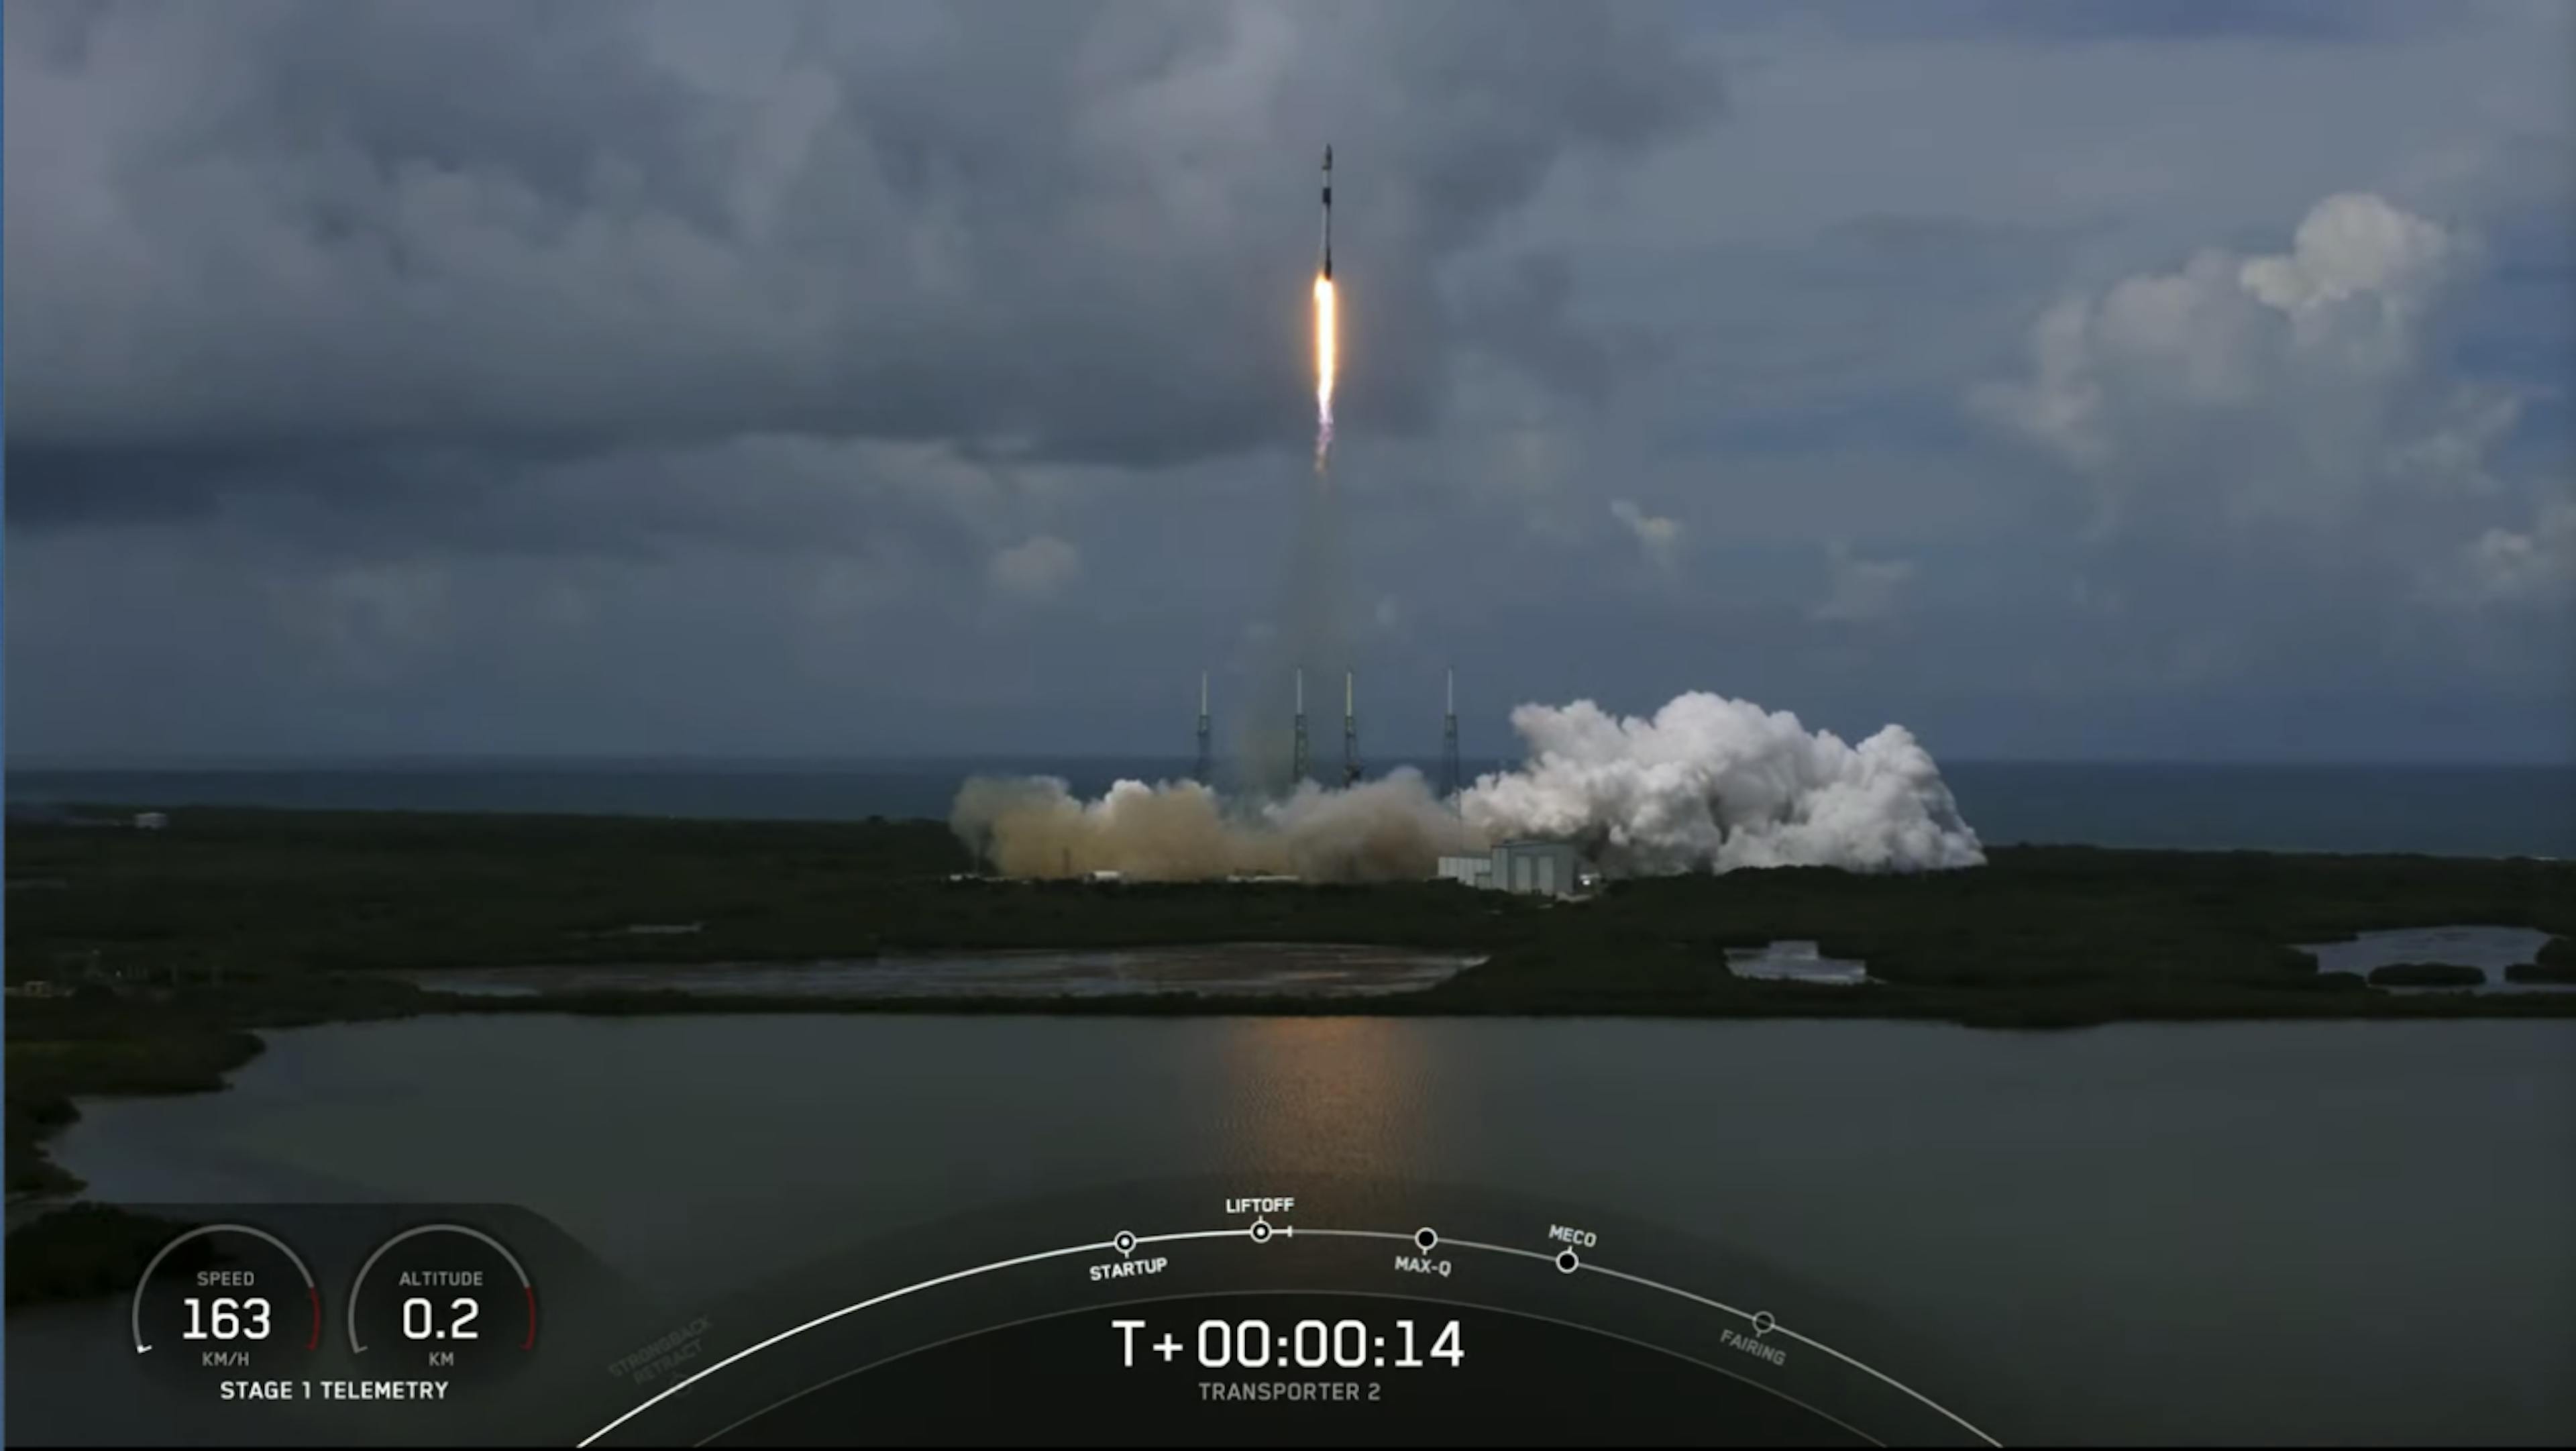 Transporter-2 mission launch. Image: SpaceX